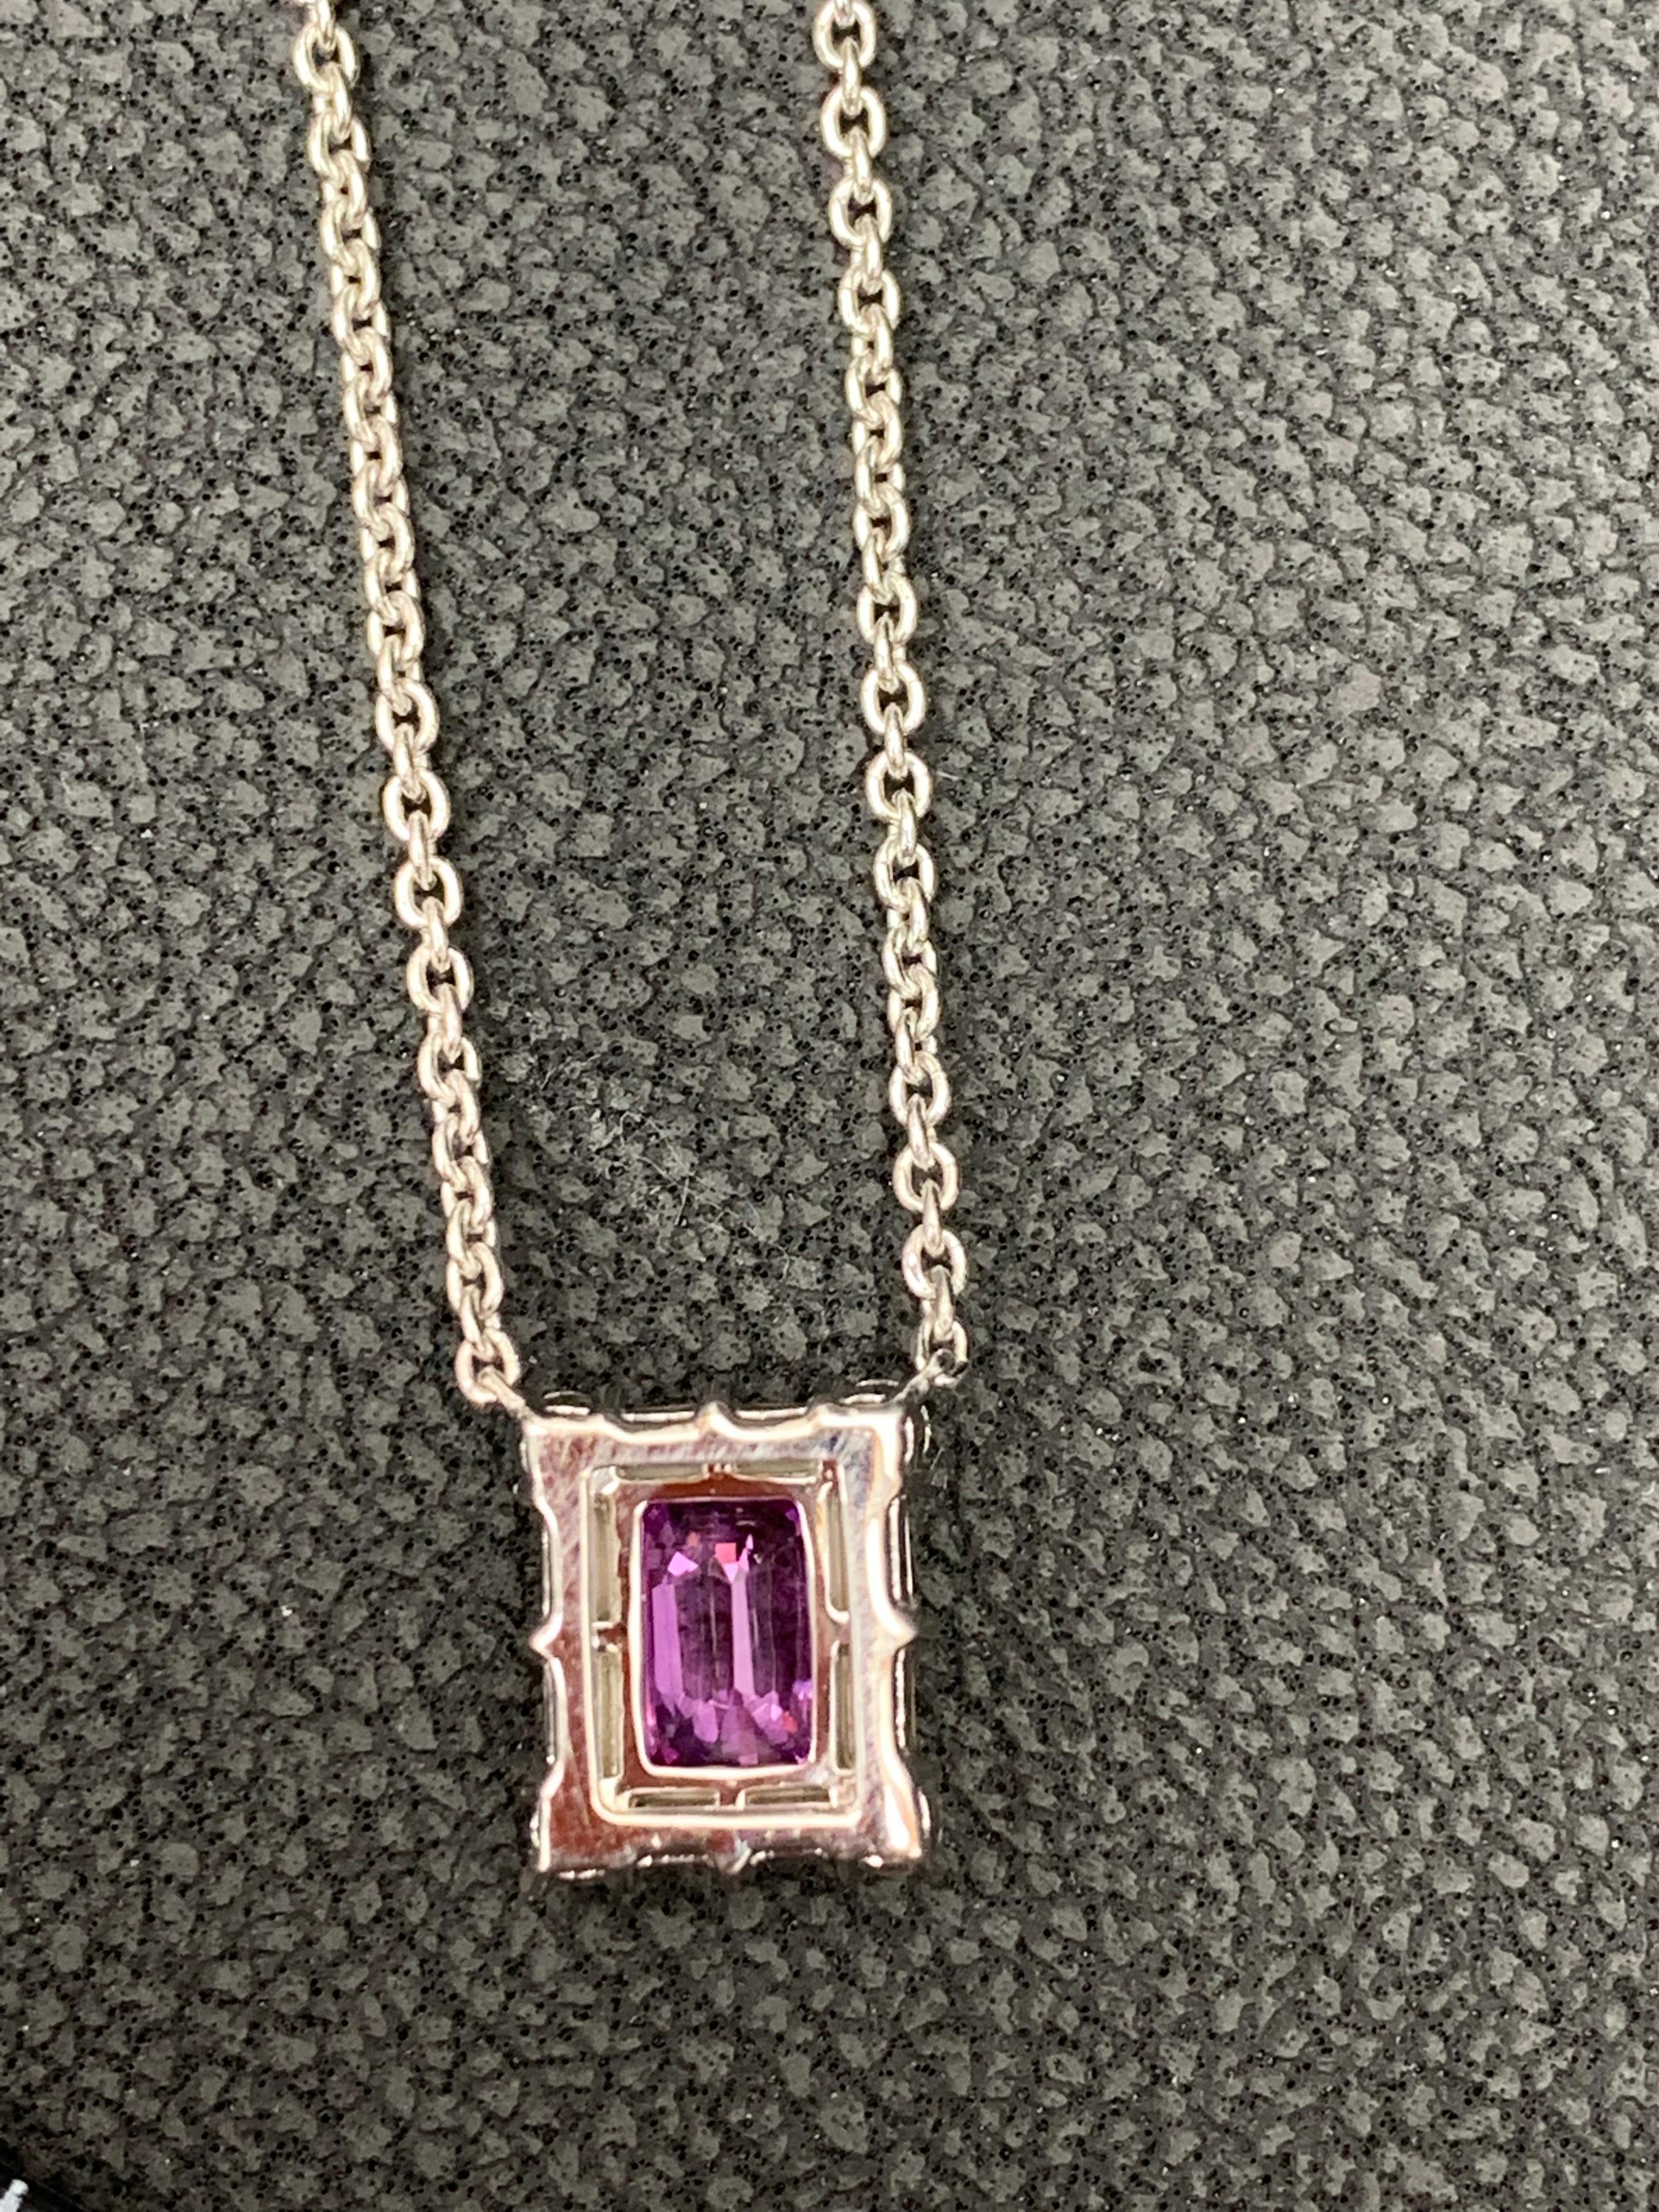 0.96 Carat Emerald Cut Pink Sapphire Diamond Pendant Necklace in 18K White Gold For Sale 2